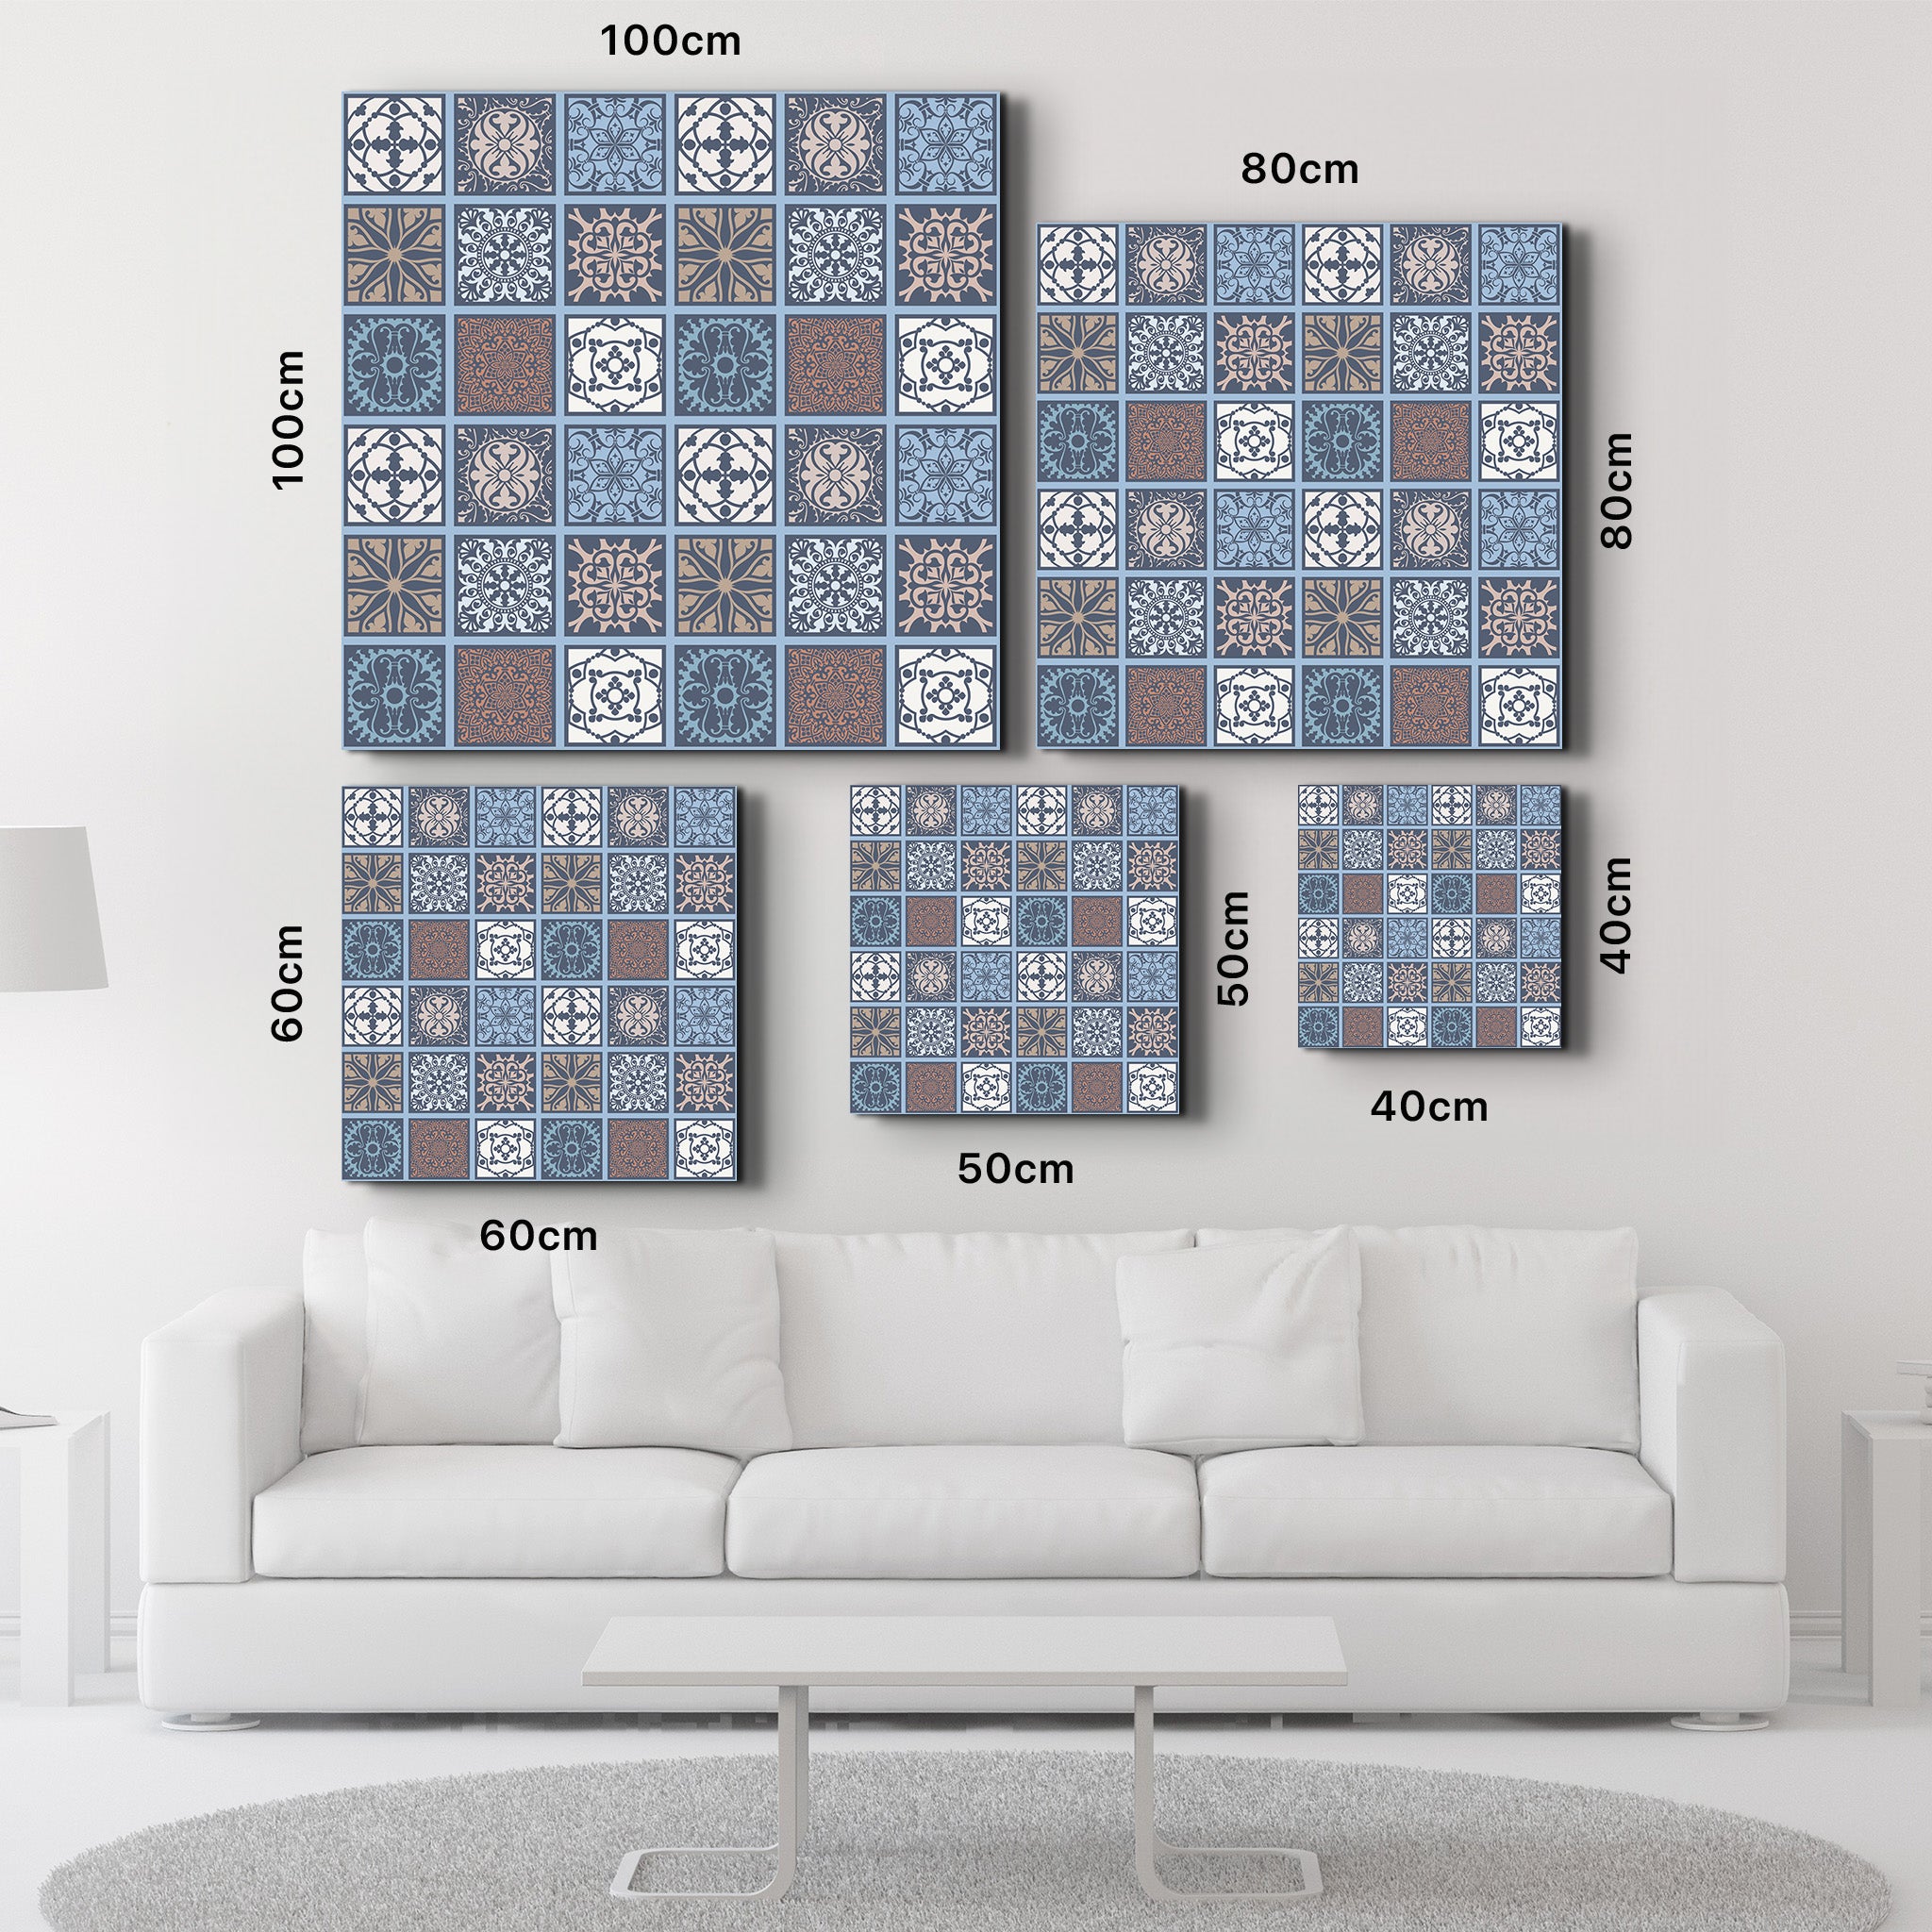 Blue-Brown Italian Ceramic Tiles Collection | Glass Wall Art